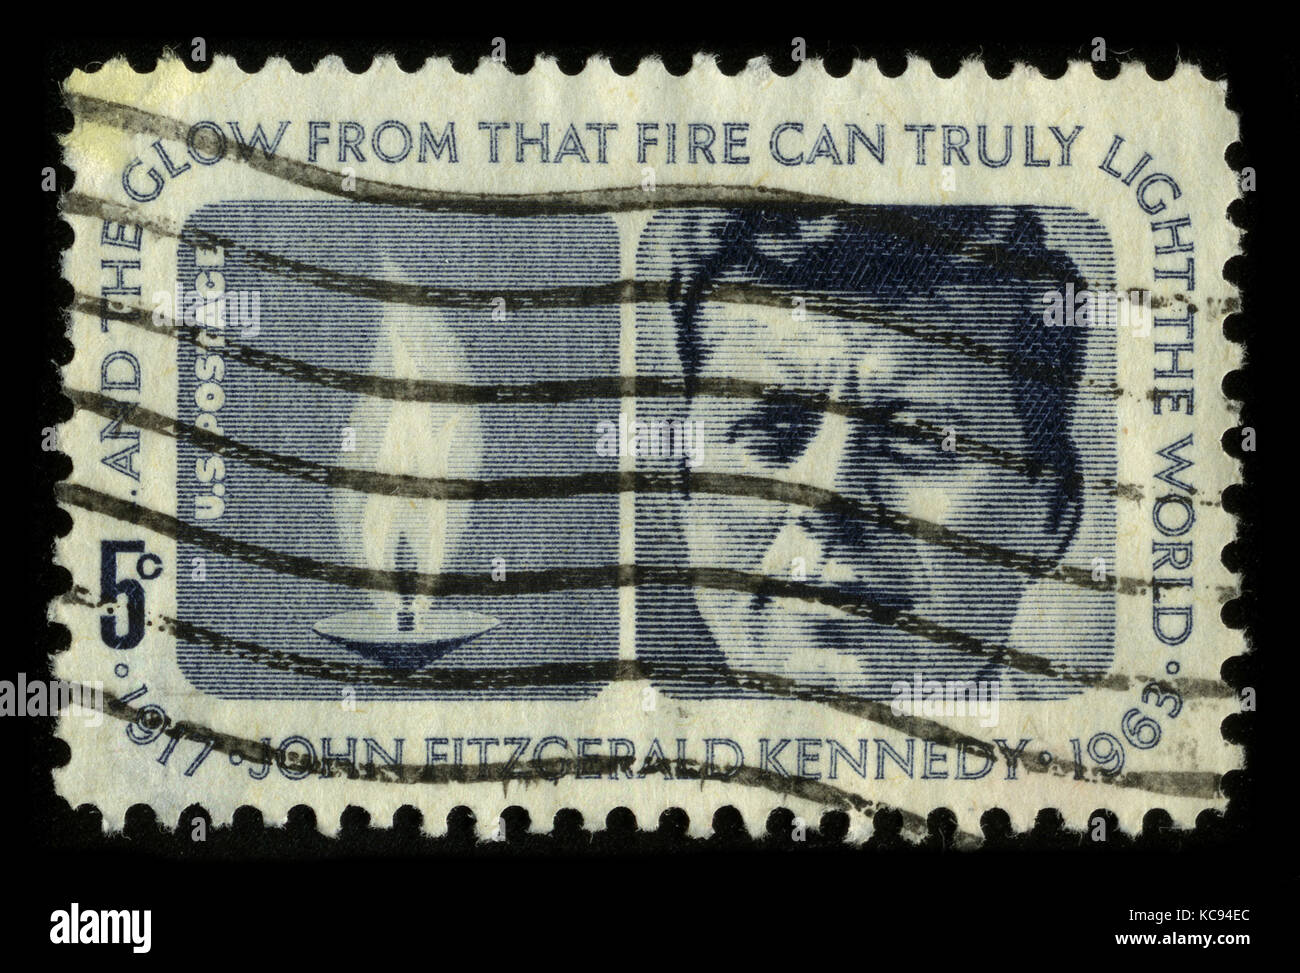 USA - CIRCA 1970: A stamp printed in USA shows image portrait John Fitzgerald 'Jack' Kennedy (May 29, 1917 – November 22, 1963), often referred to by  Stock Photo